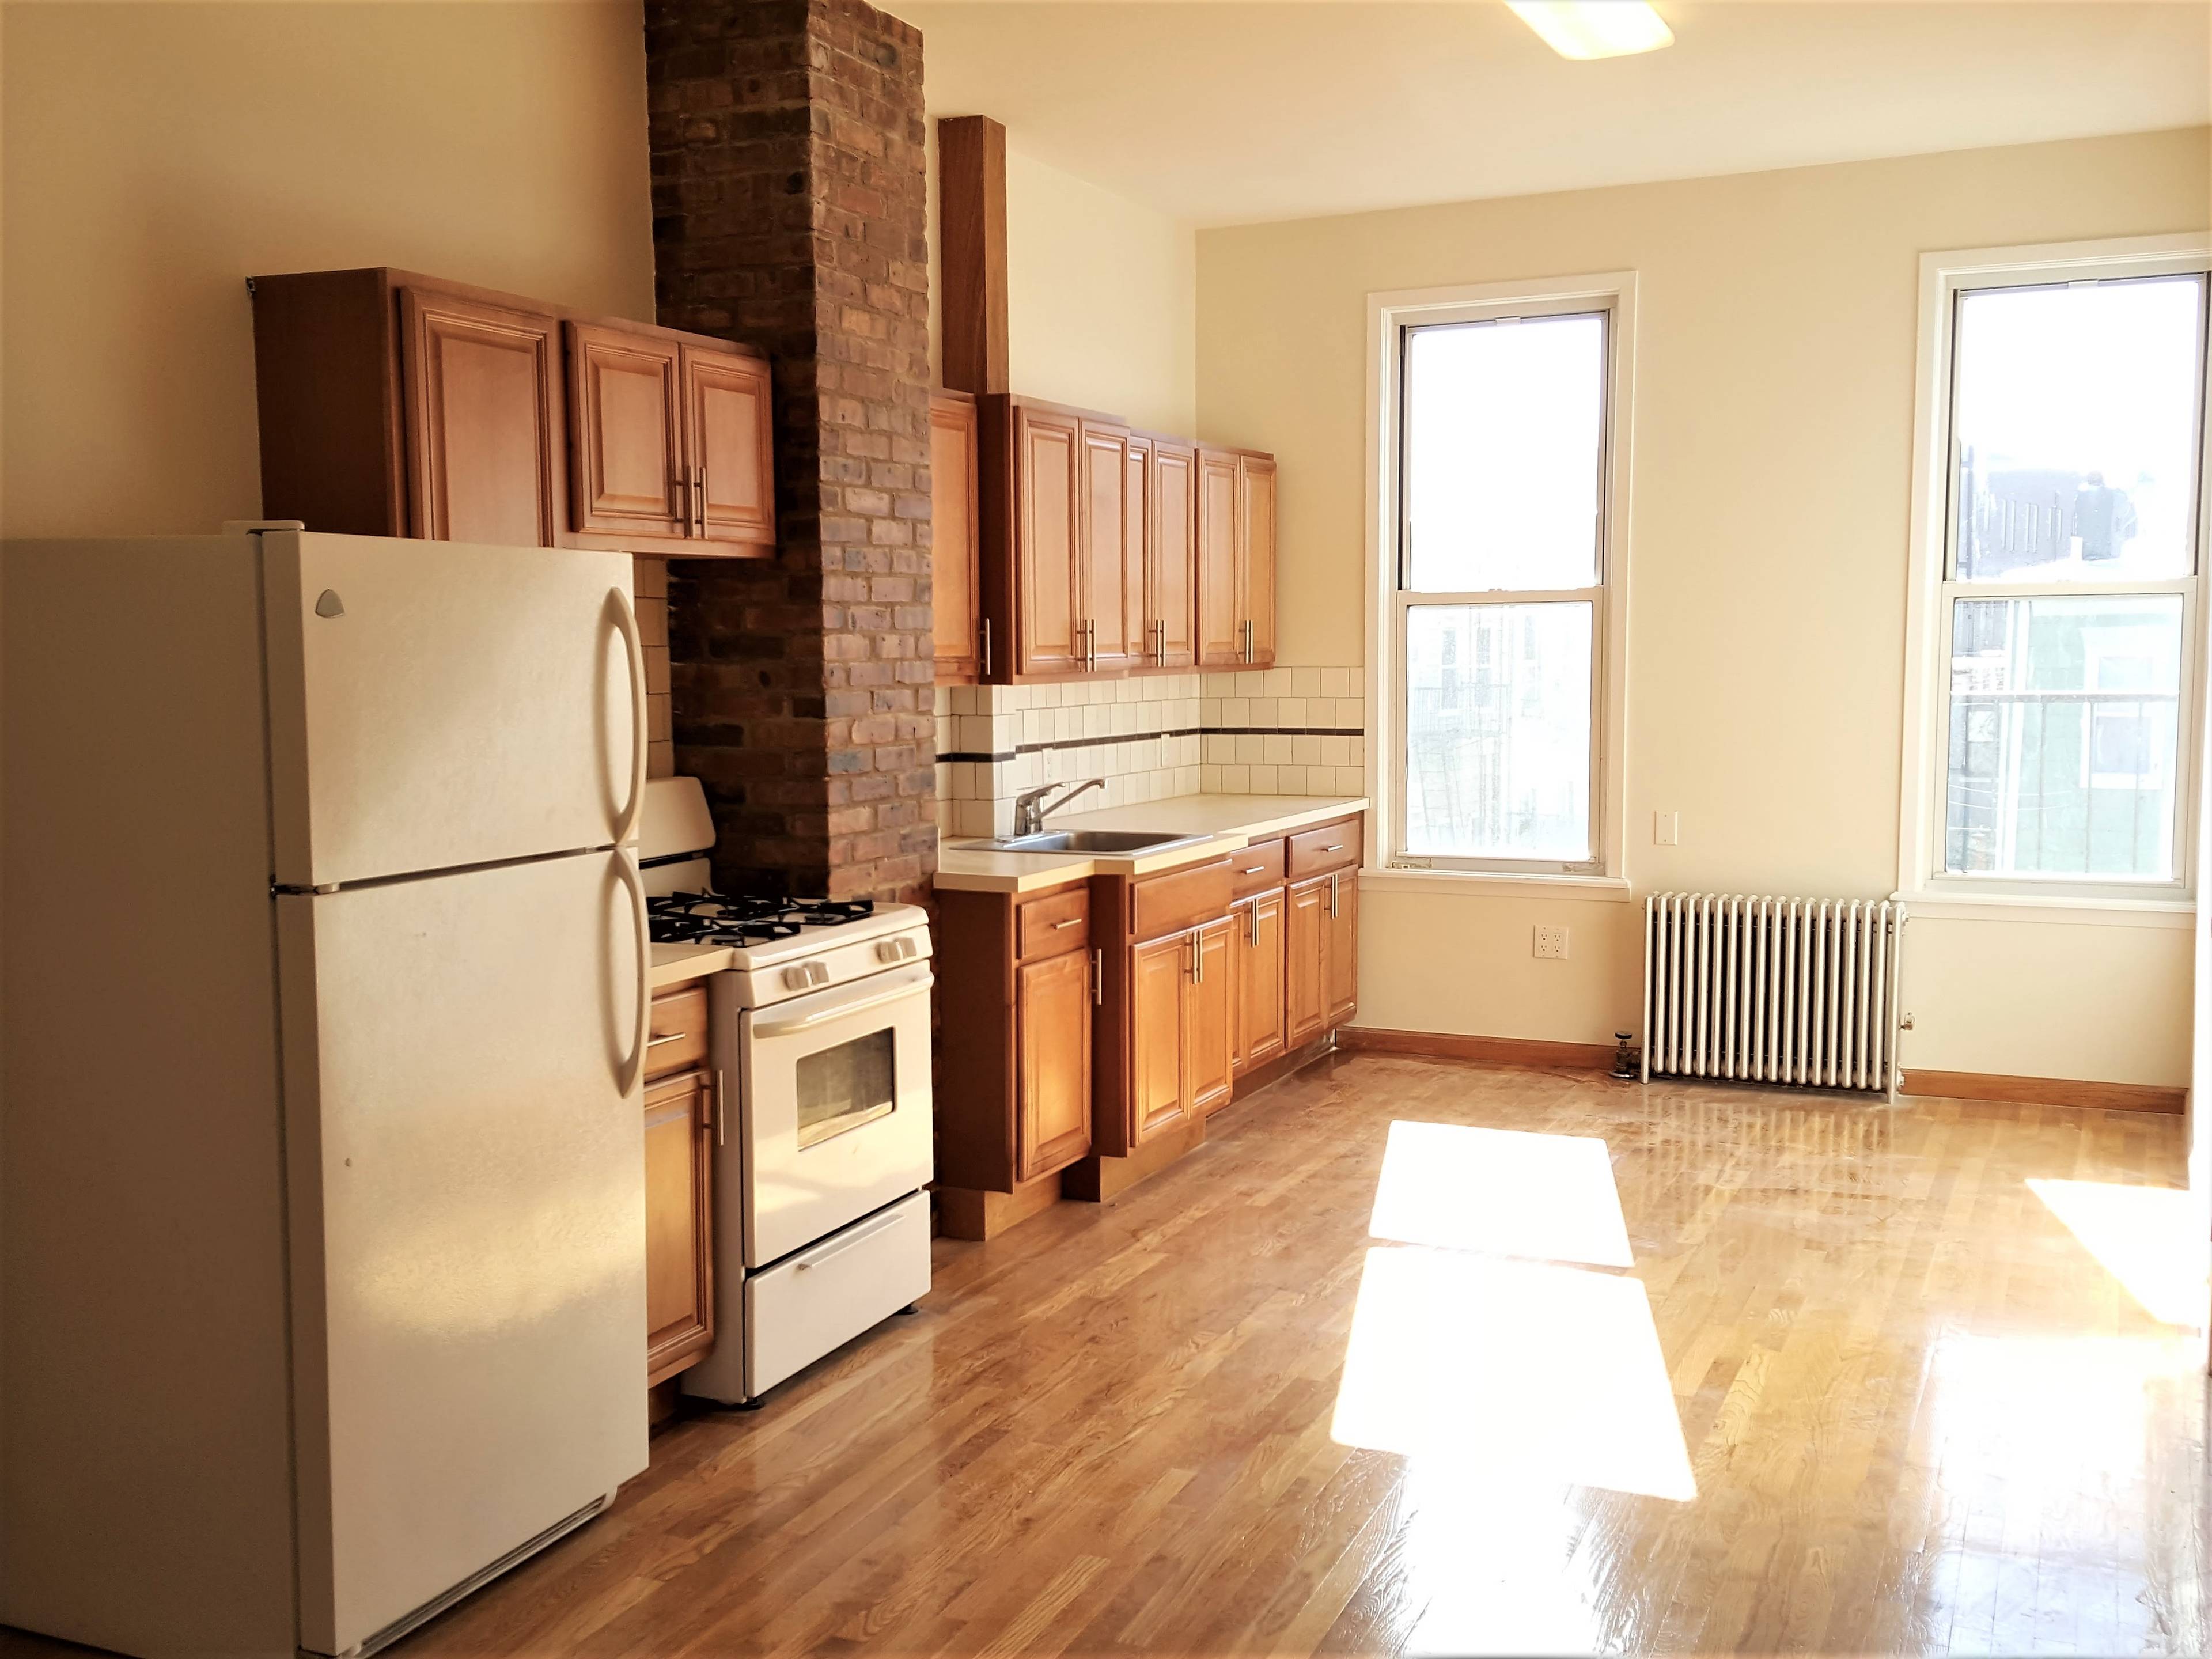 **SIZE MATTERS** MASSIVE, FLOOR THROUGH 1 BR WITH AN EAT IN KITCHEN.  RIGHT ON THE BORDER OF GREENPOINT AND THE NORTHSIDE OF WILLIAMSBURG!